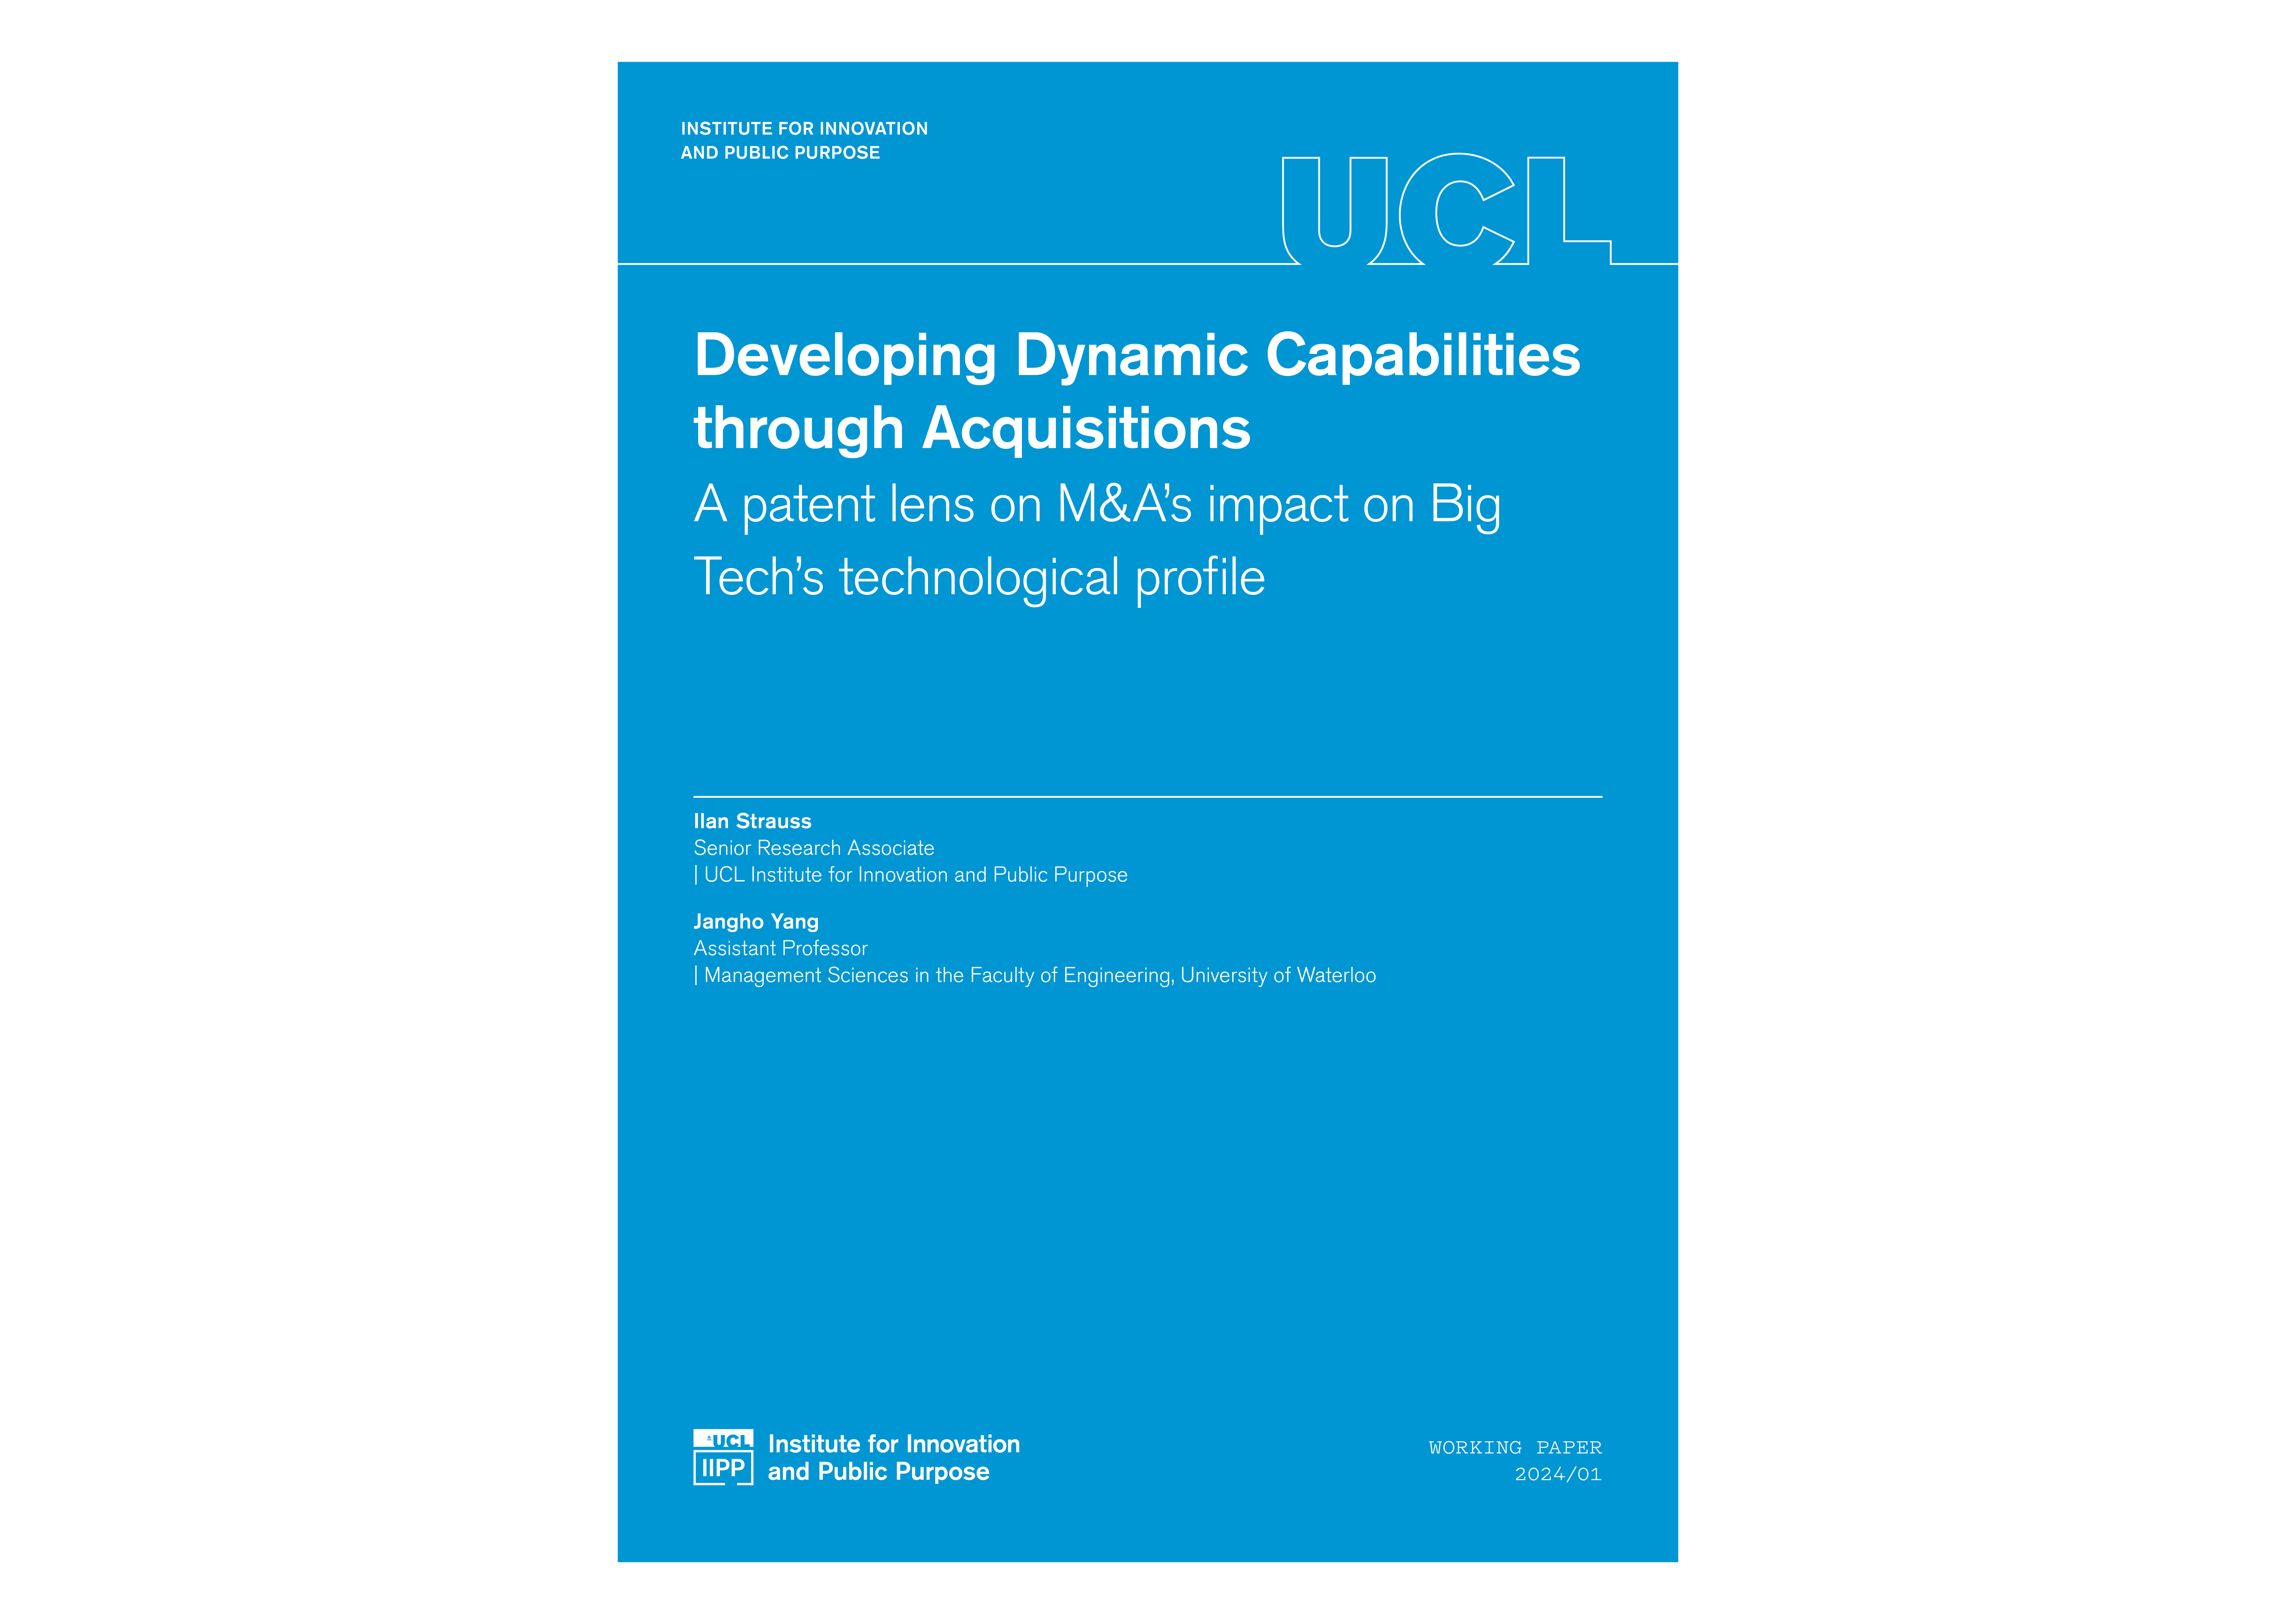 Developing Dynamic Capabilities through Acquisitions - A patent lens on M&A’s impact on Big Tech’s technological profile